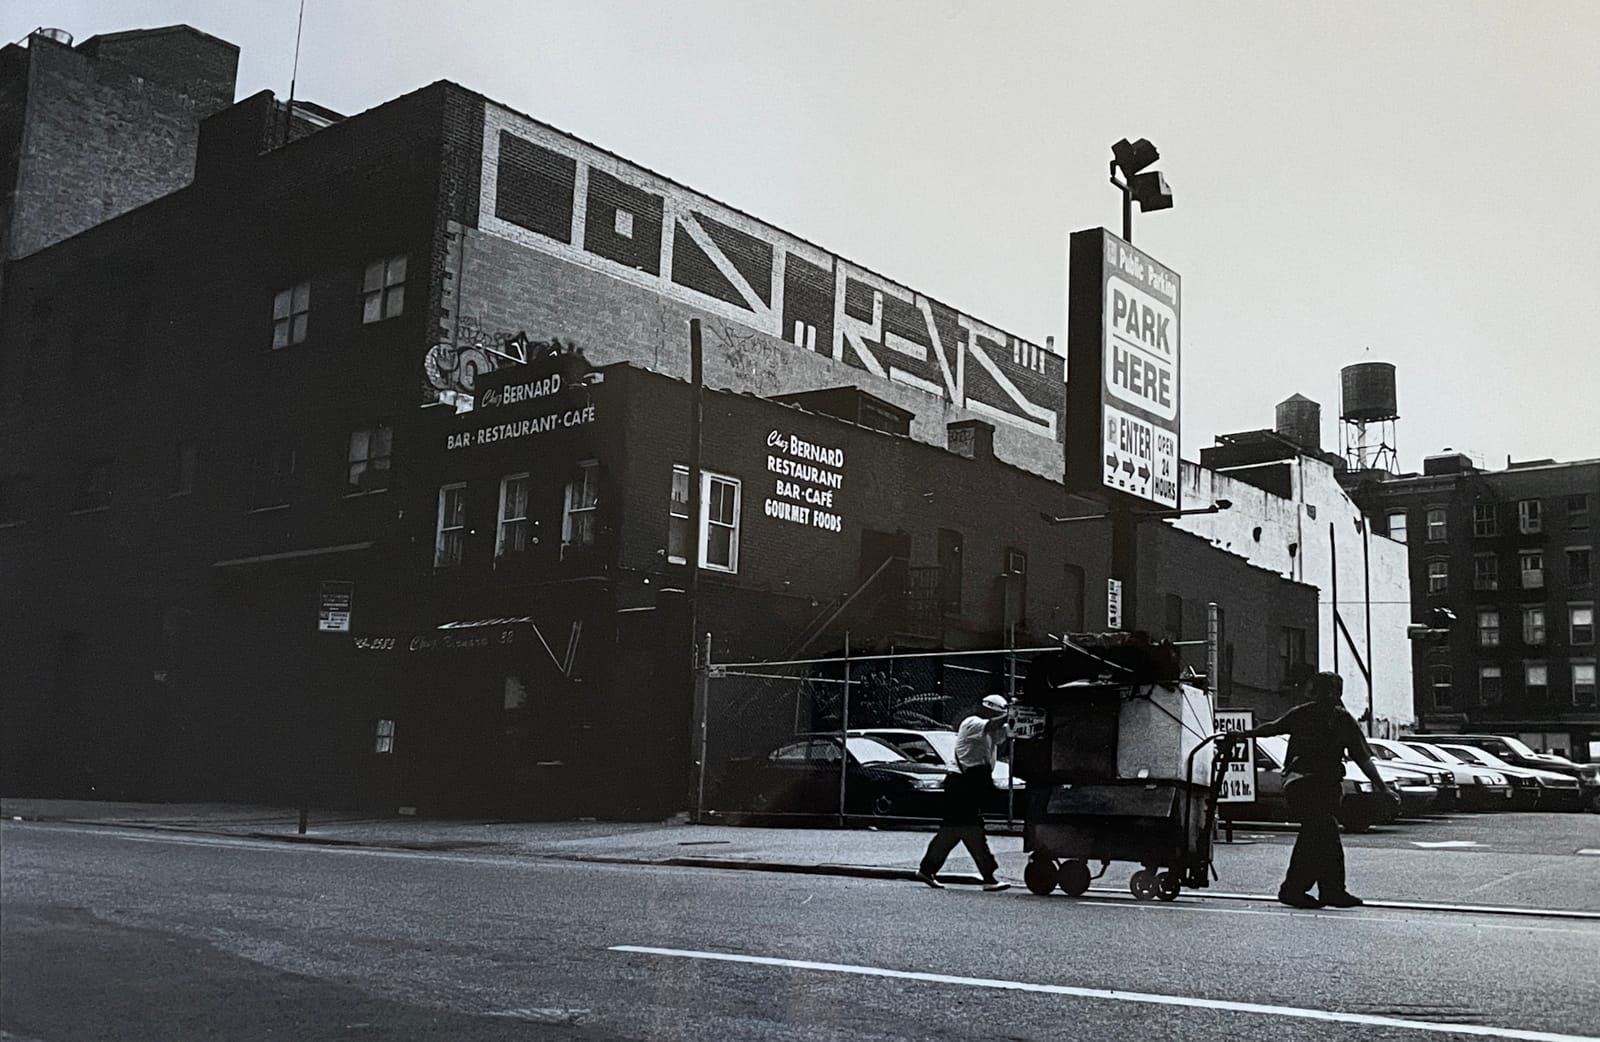 Black and white photo showing a New York street scene with signage and graffiti visible on buildings behind a parking lot and men moving a cart along a road.